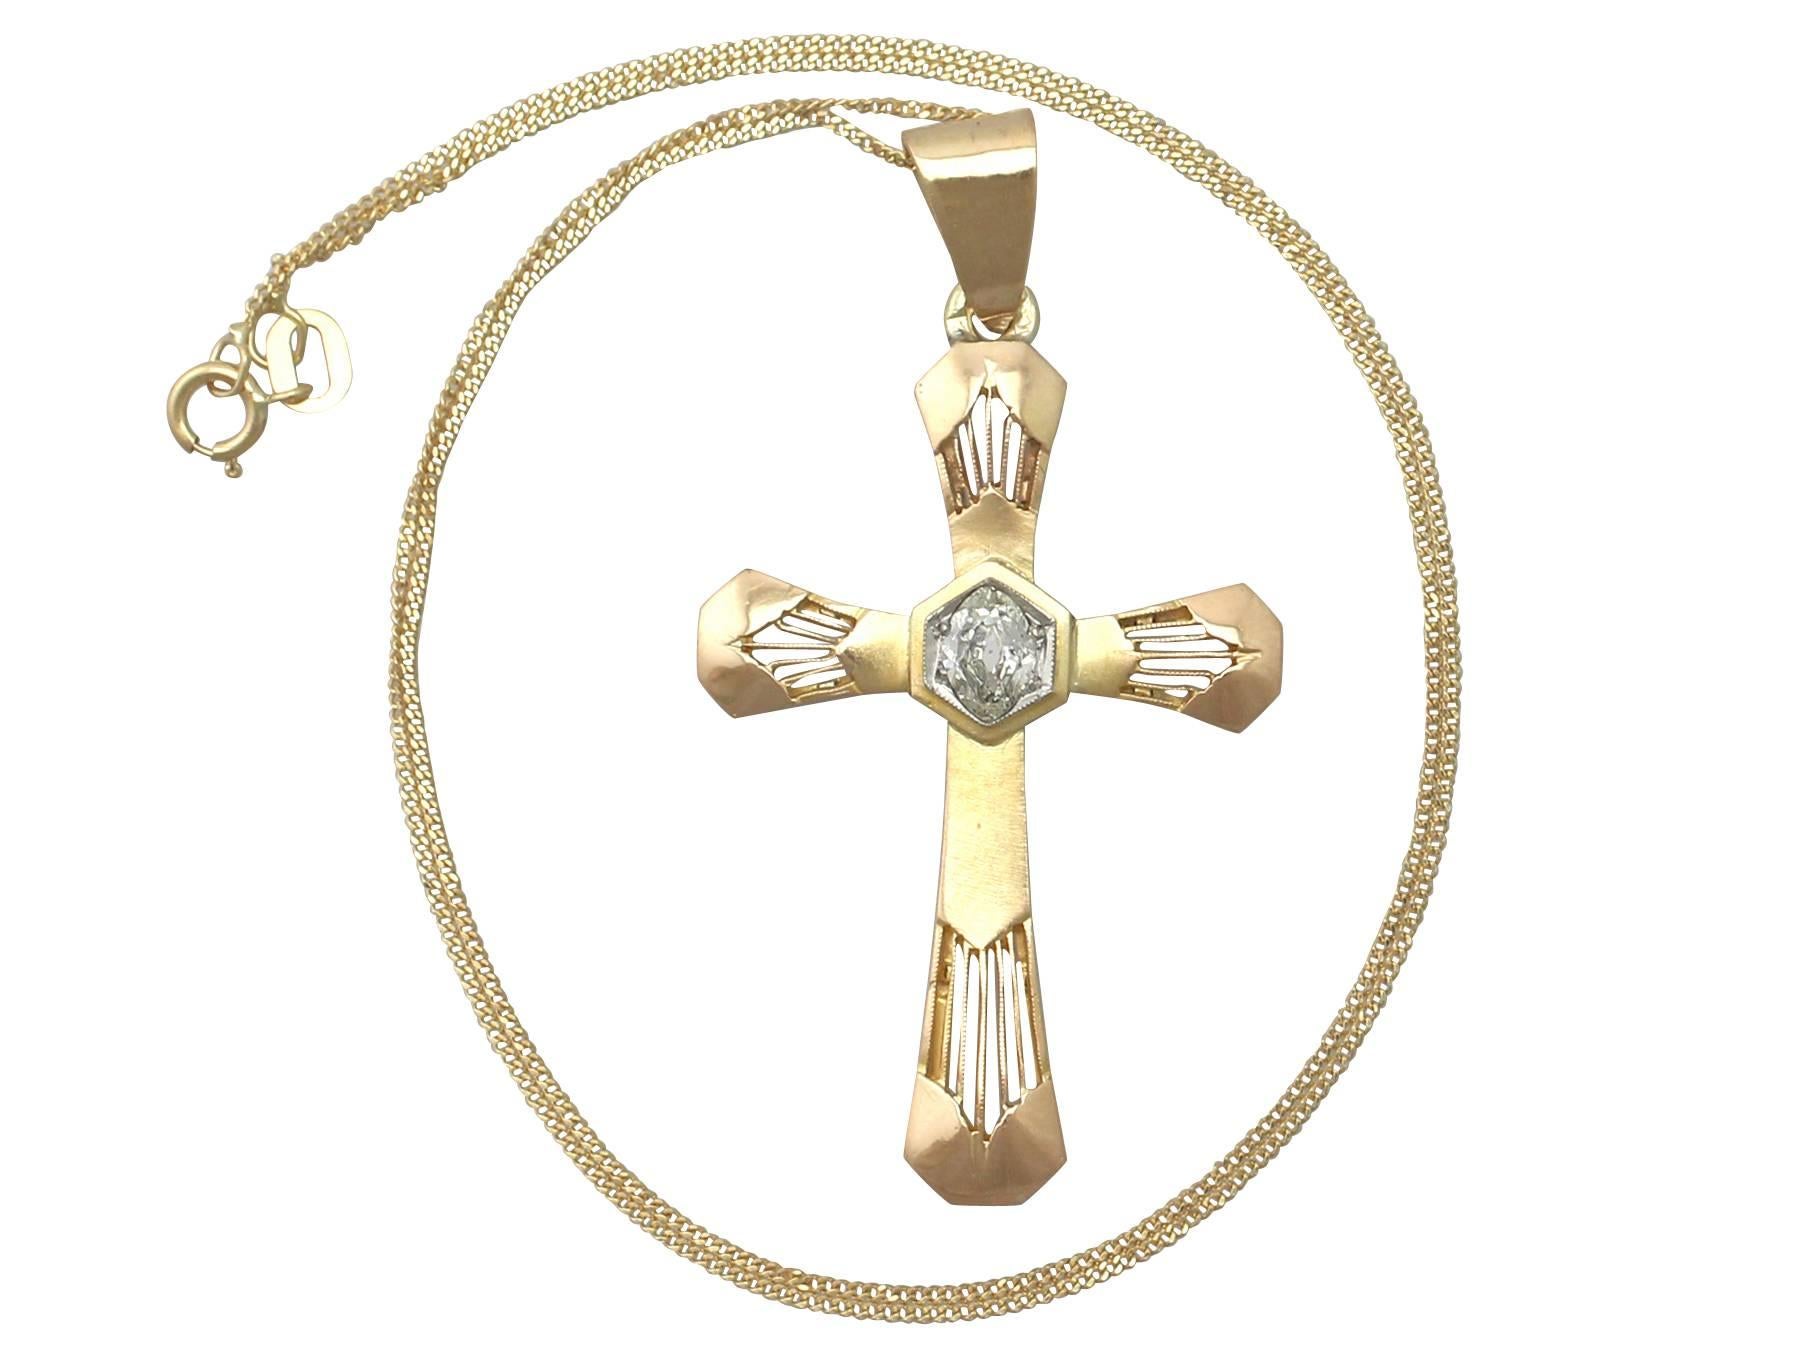 A fine and impressive antique German 0.35 carat diamond and 14 karat yellow gold, 14 karat white gold set cross pendant; part of our diverse diamond jewelry collection

This fine and impressive diamond cross pendant has been crafted in 14k yellow